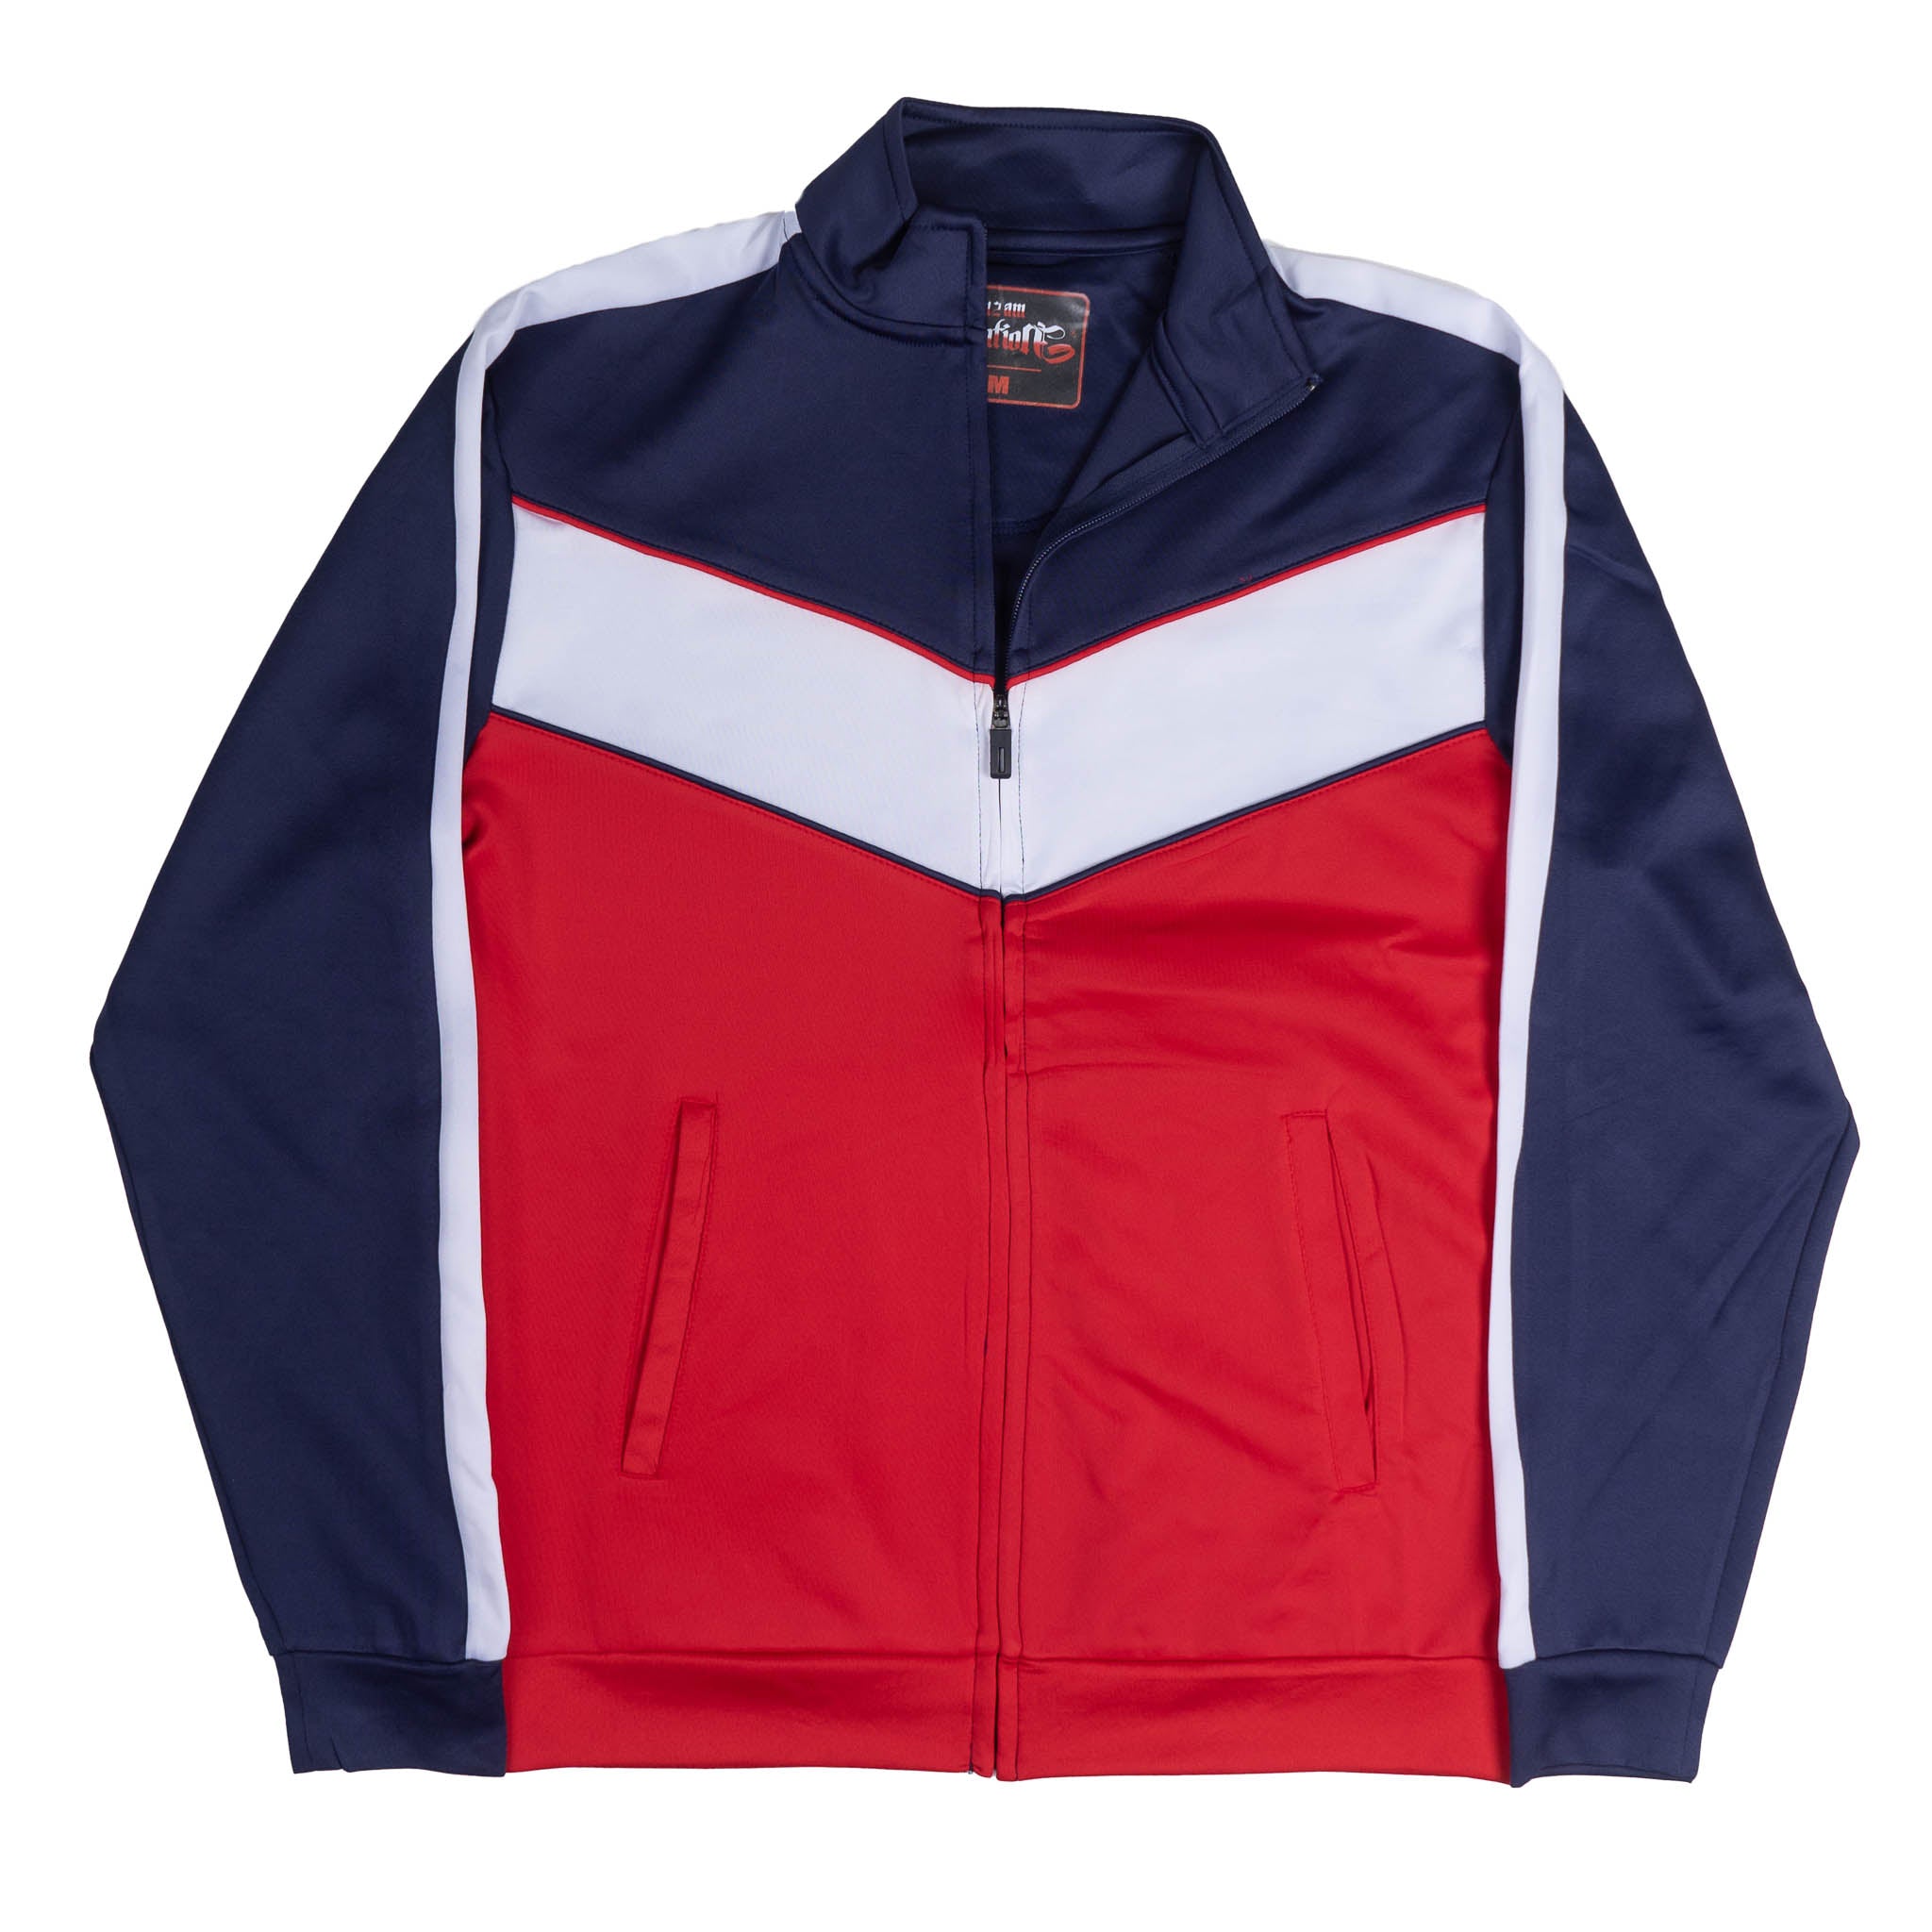 12 AM NATION COLOR BLOCK TRACK JACKET NAVY/WHITE/RED - 79213